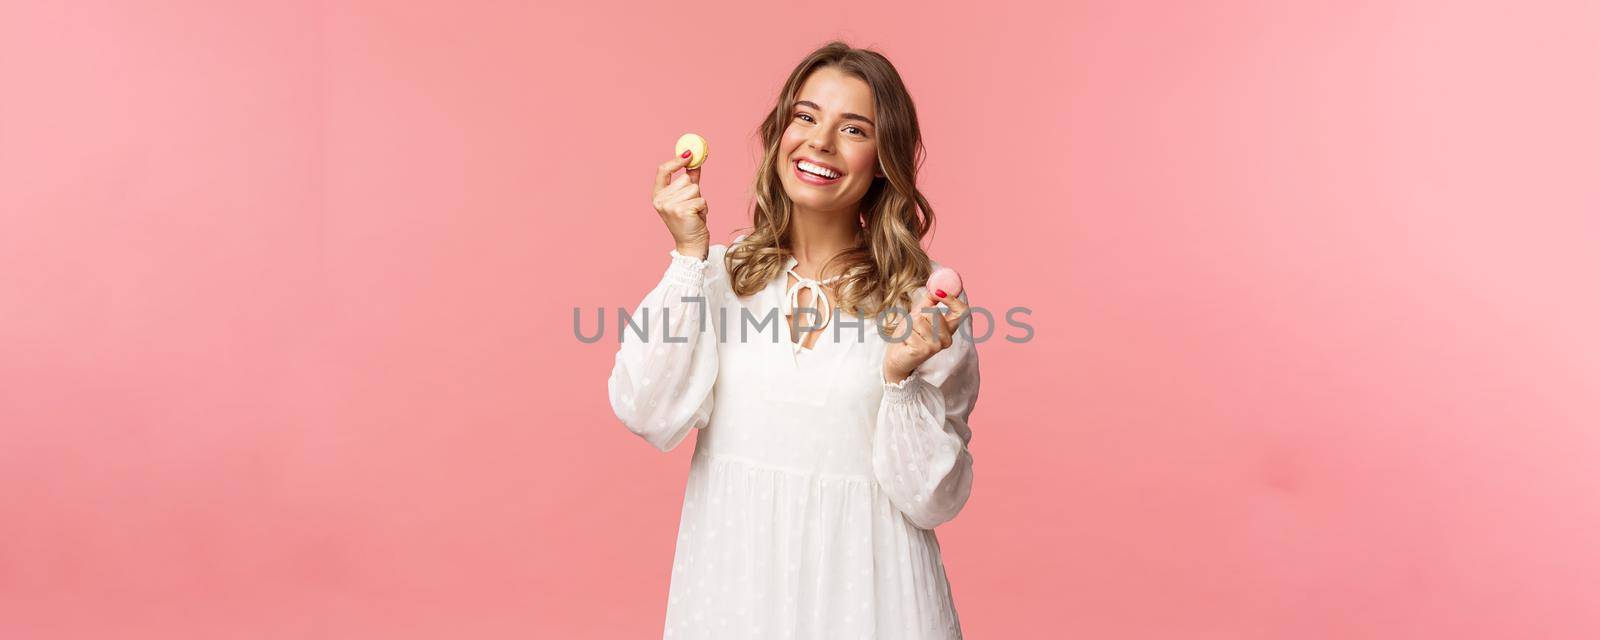 Holidays, spring and party concept. Portrait of cute romantic blond girl in white dress, licking lips as tempting to eat delicious dessert, holding two macarons and look pleased, pink background.